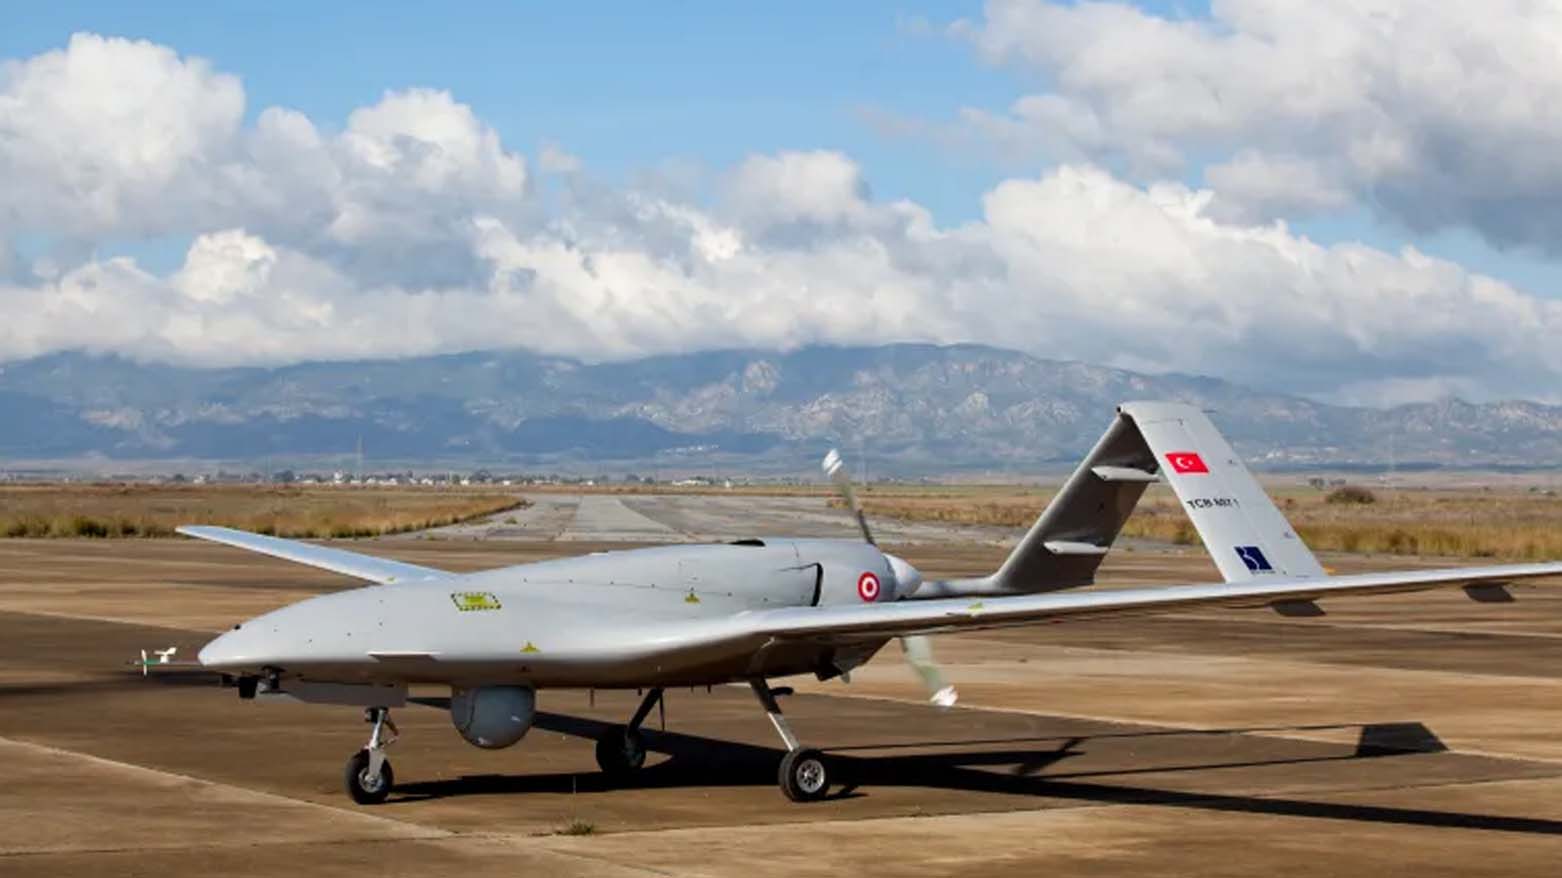 Turkish-made Bayraktar TB2 drone is pictured at Gecitkale military airbase near Famagusta in Northern Cyprus, Dec. 16, 2019 (Photo: Birol Bebek/AFP)